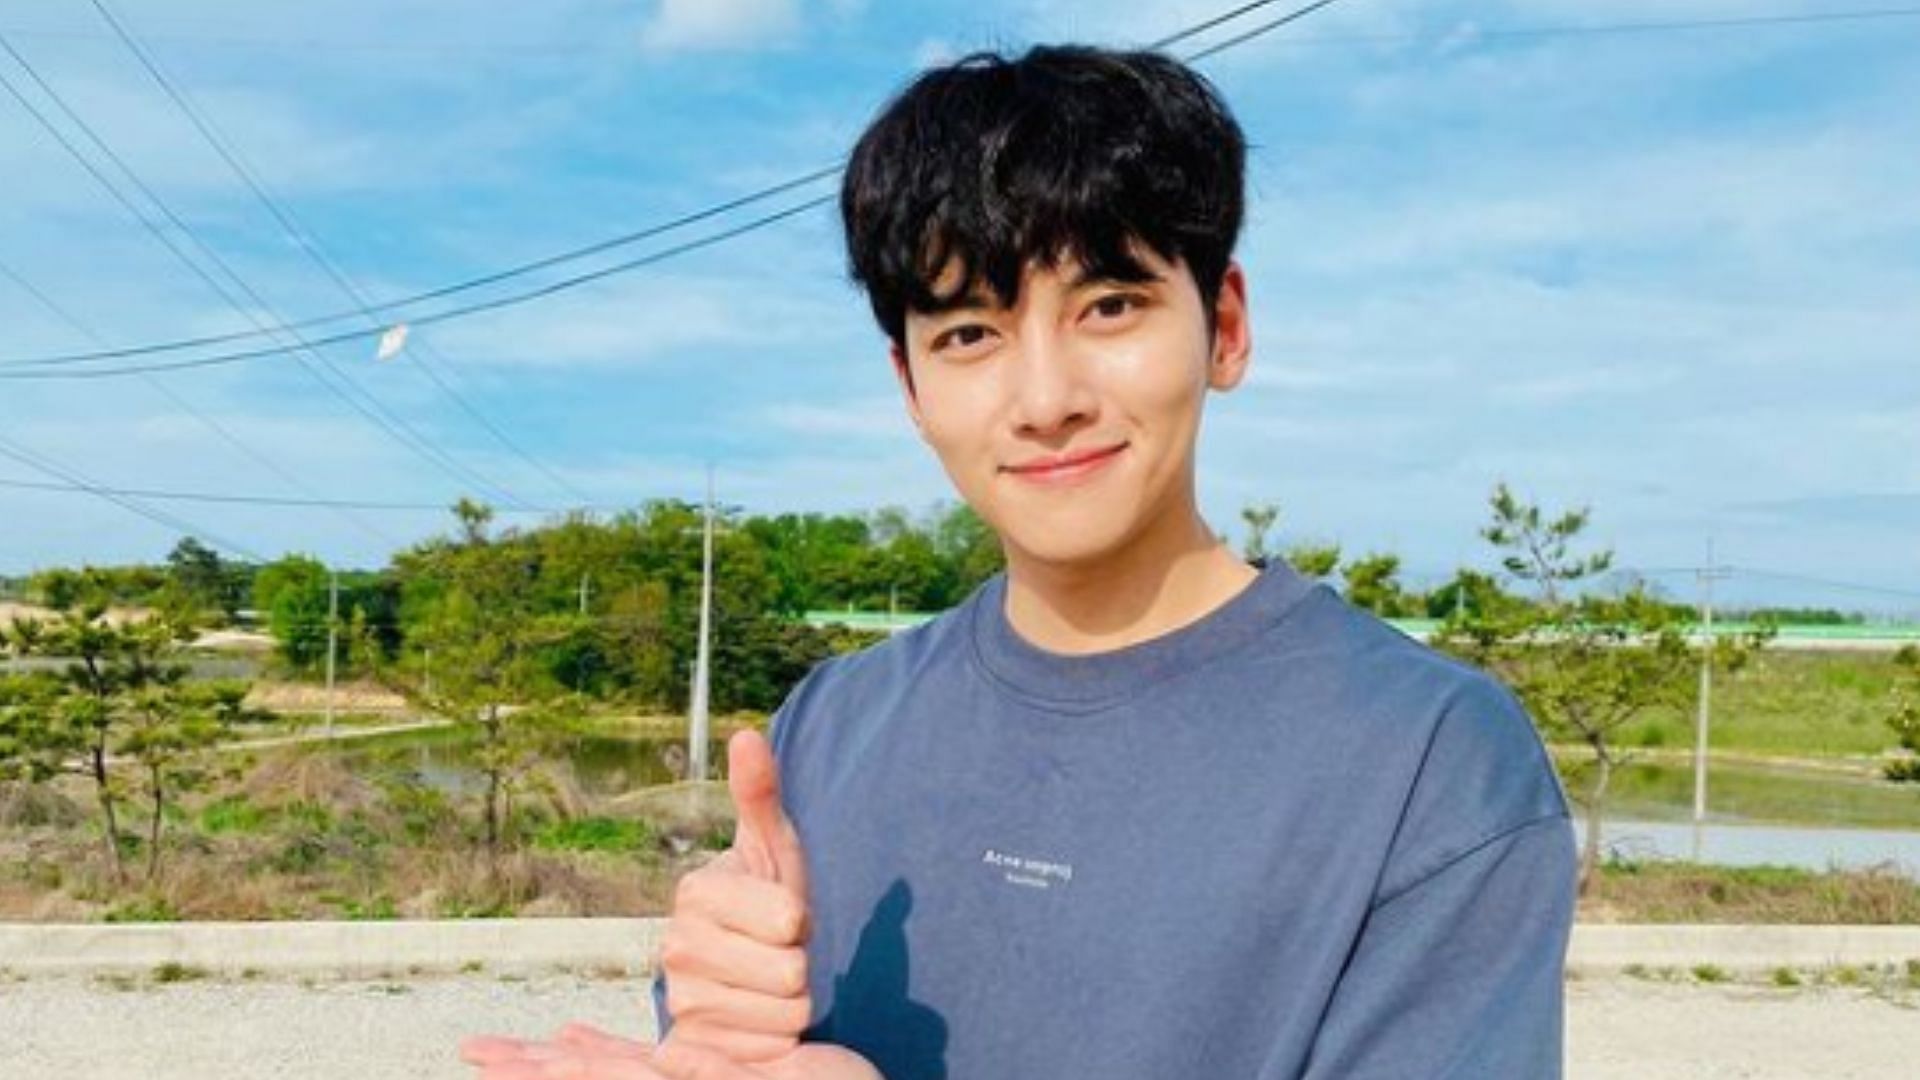 Ji Chang-wook poses for a picture (Image via Instagram/@jichangwook)